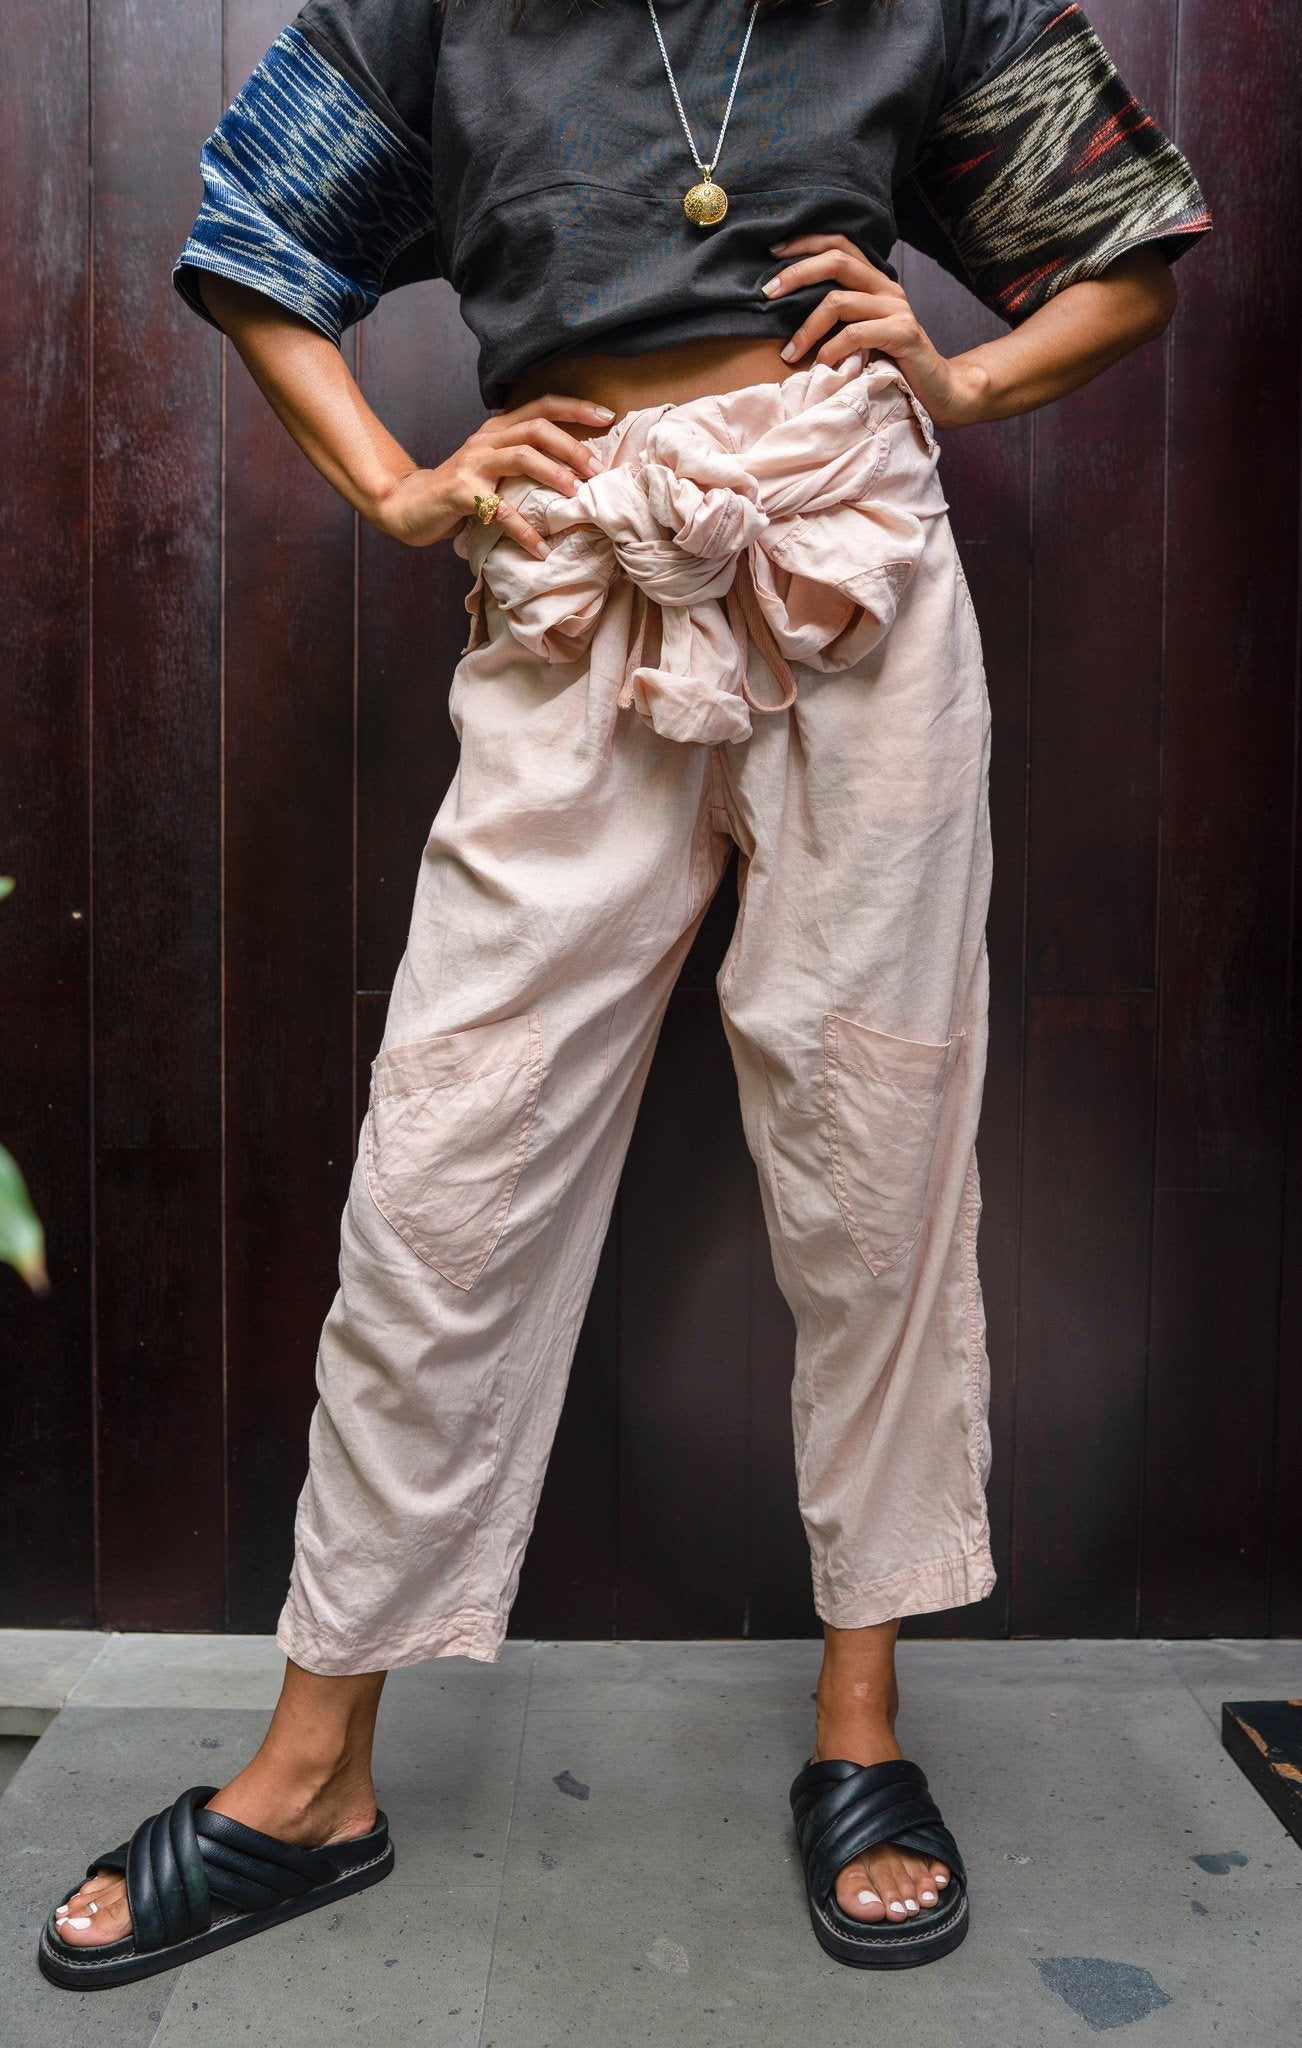 Amira One Tone Coconut Pink Adventure Sail Jumpsuit Catalogue Shot tie at waist zoomed out perspective.